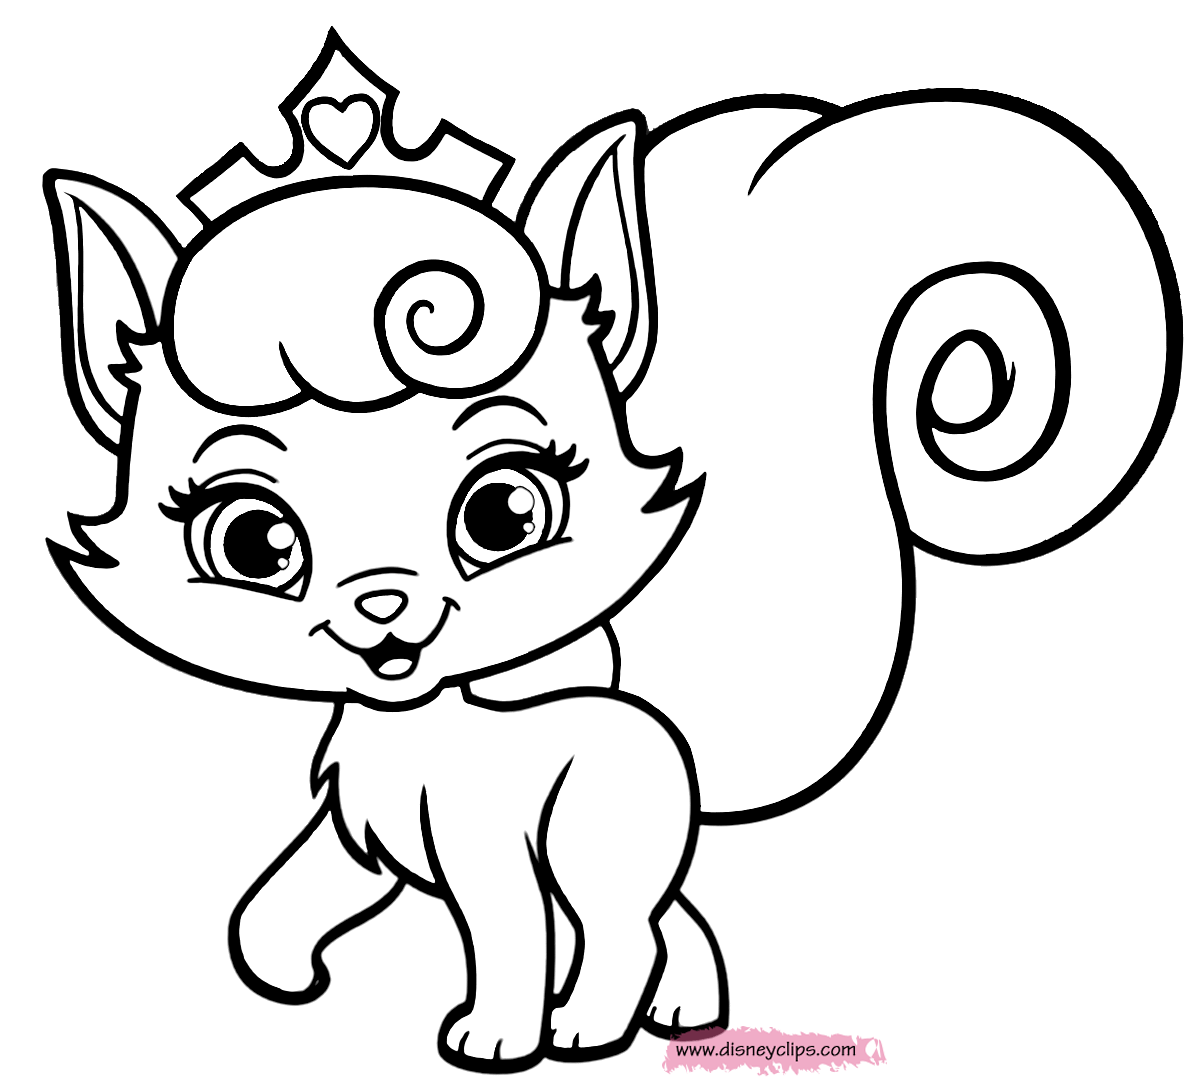 cat pictures for kids to color kitten coloring pages free for your kids cat coloring color to cat for kids pictures 